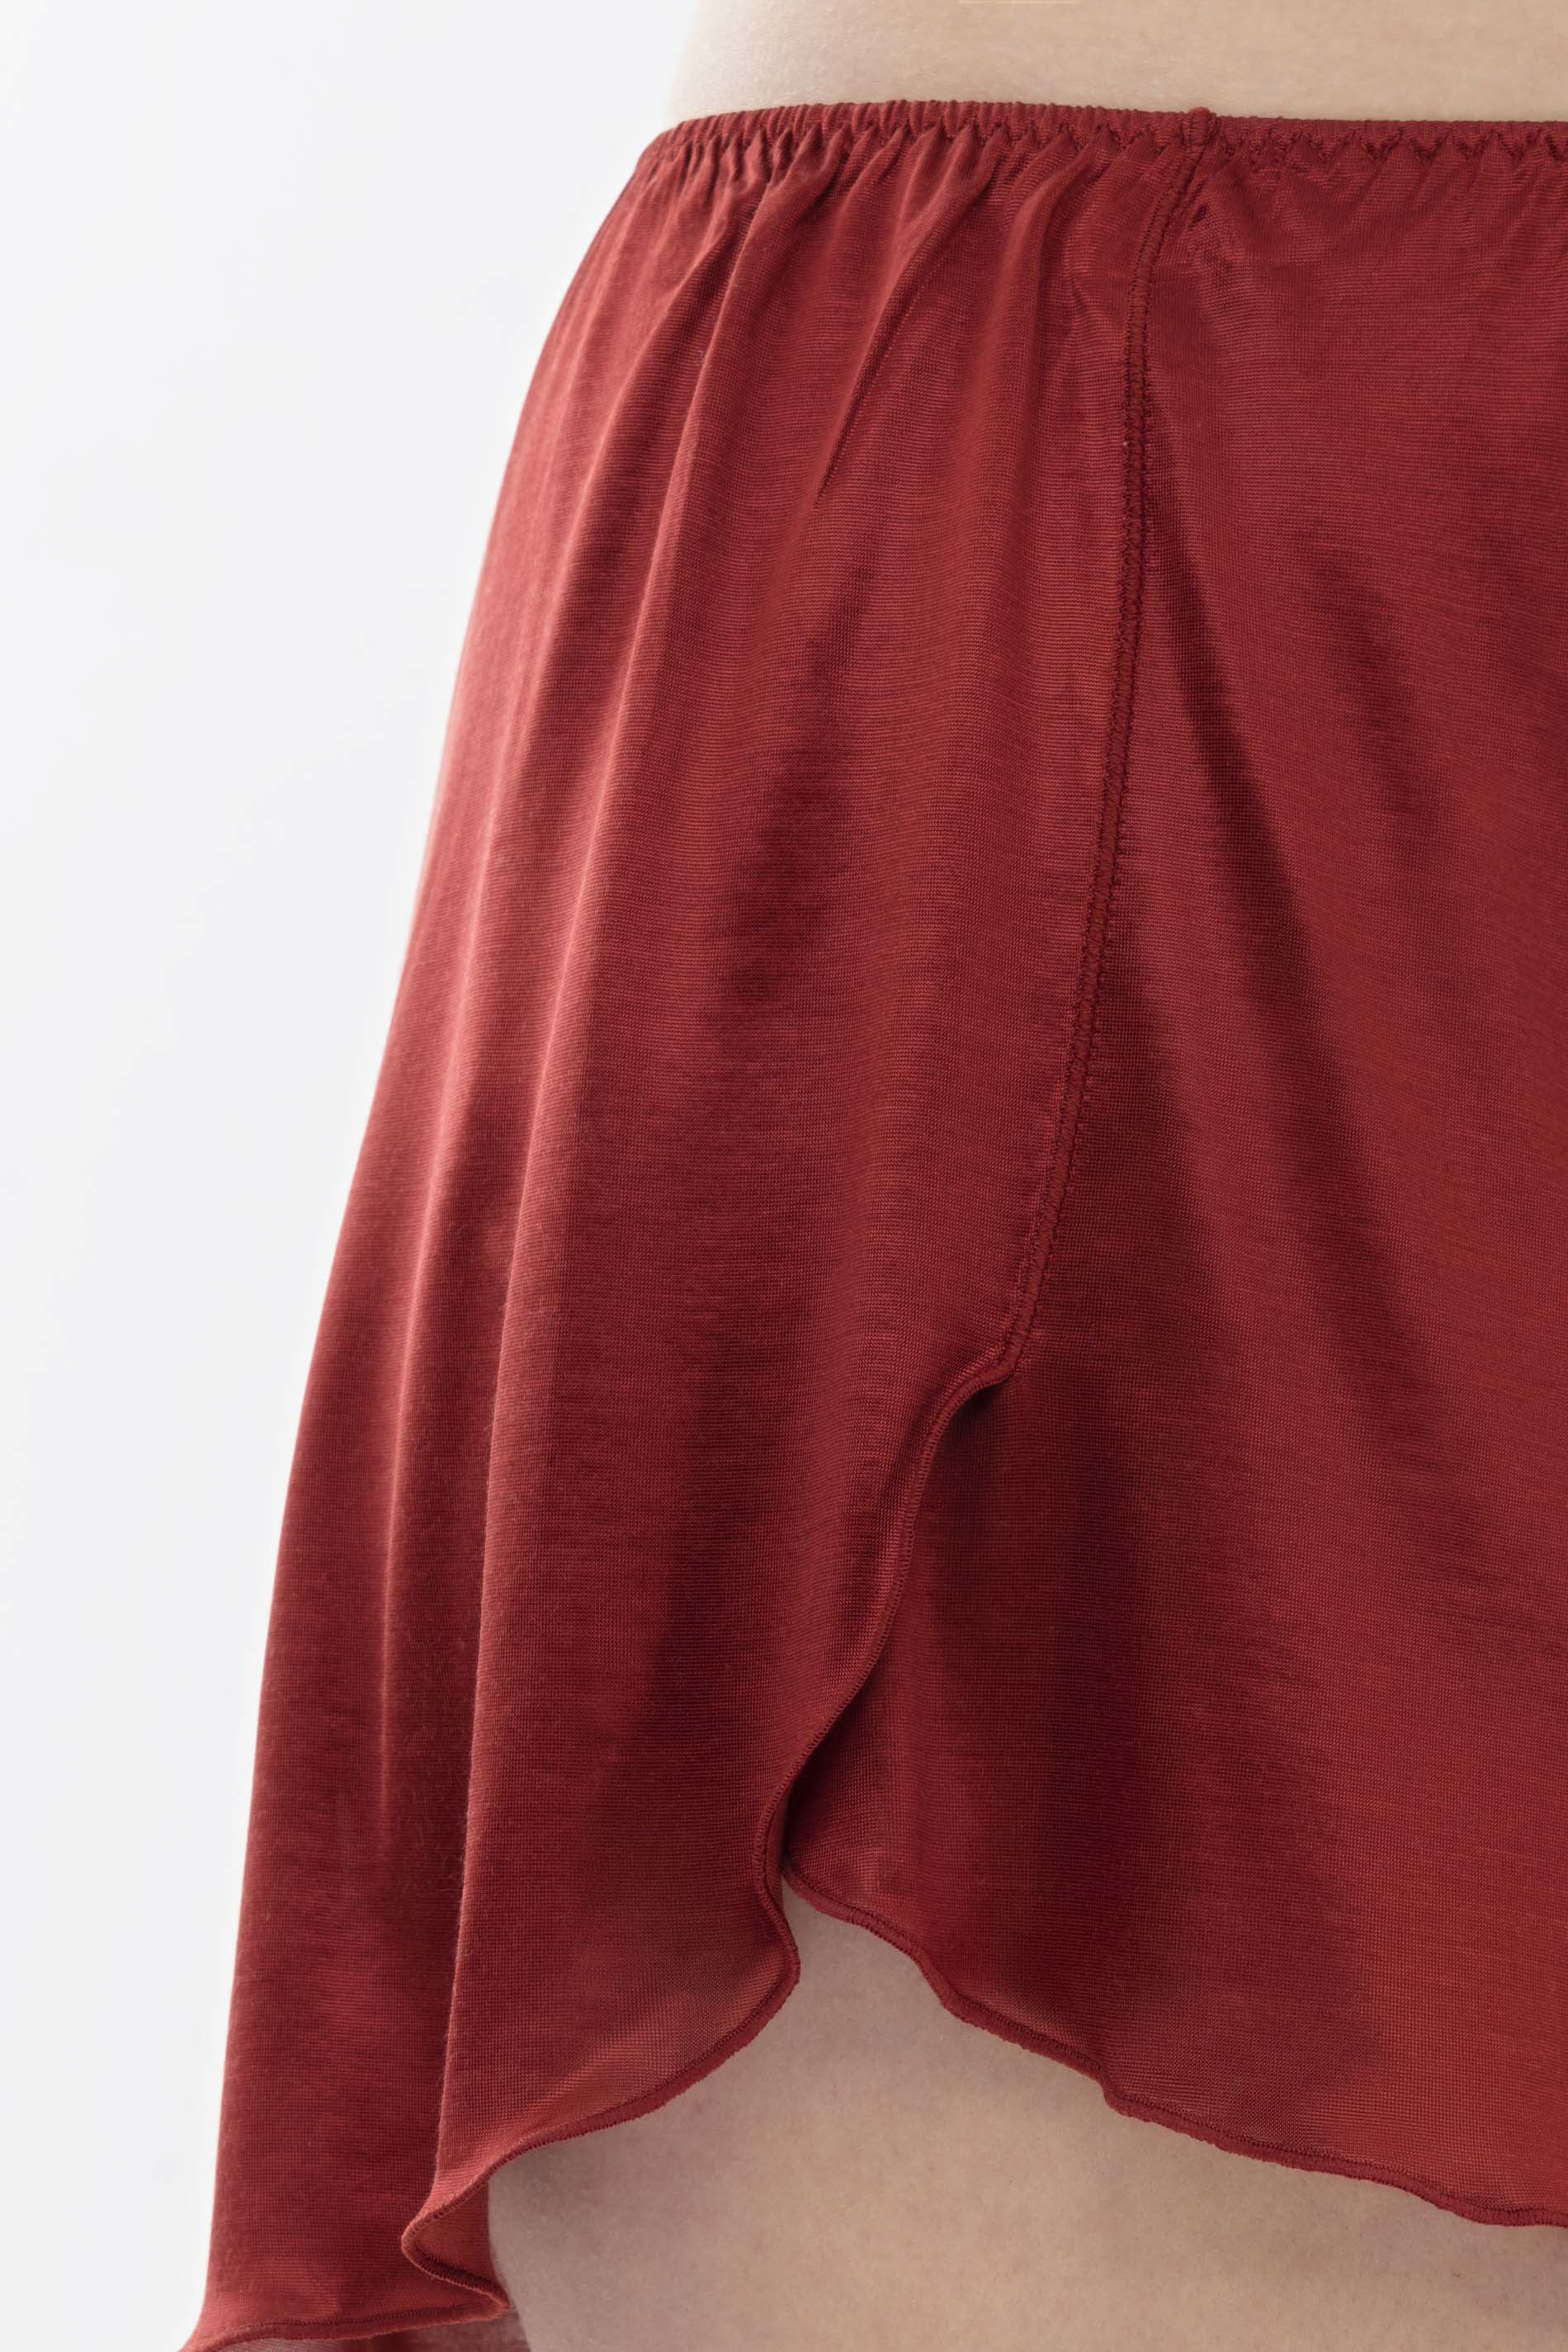 French knickers Red Pepper Serie Coco Detail View 01 | mey®